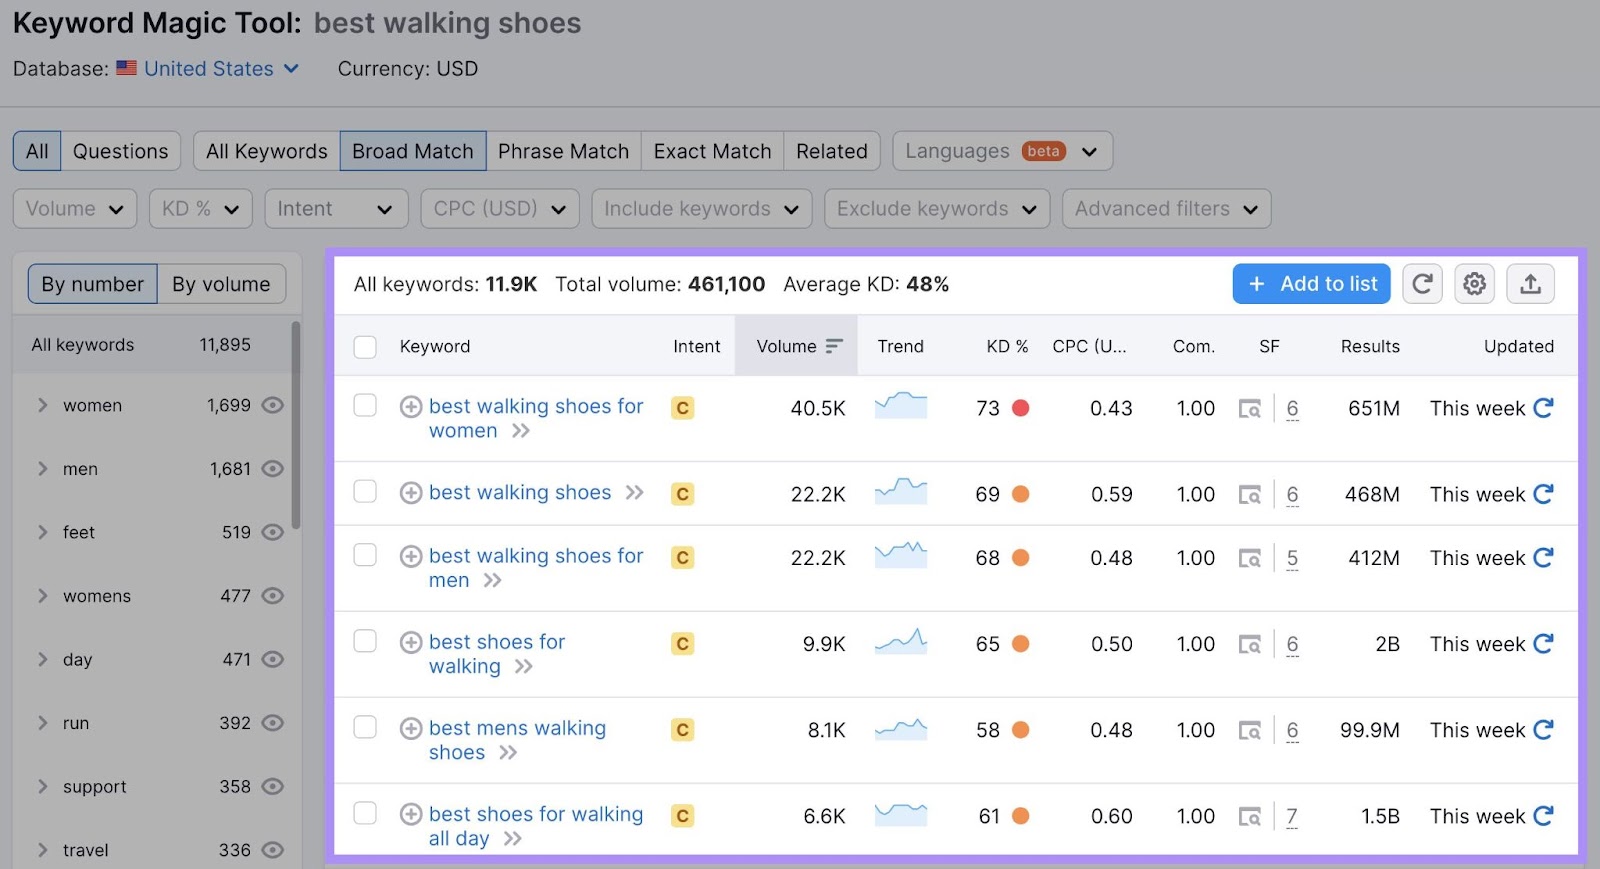 Keyword Magic Tool results for "best walking shoes"